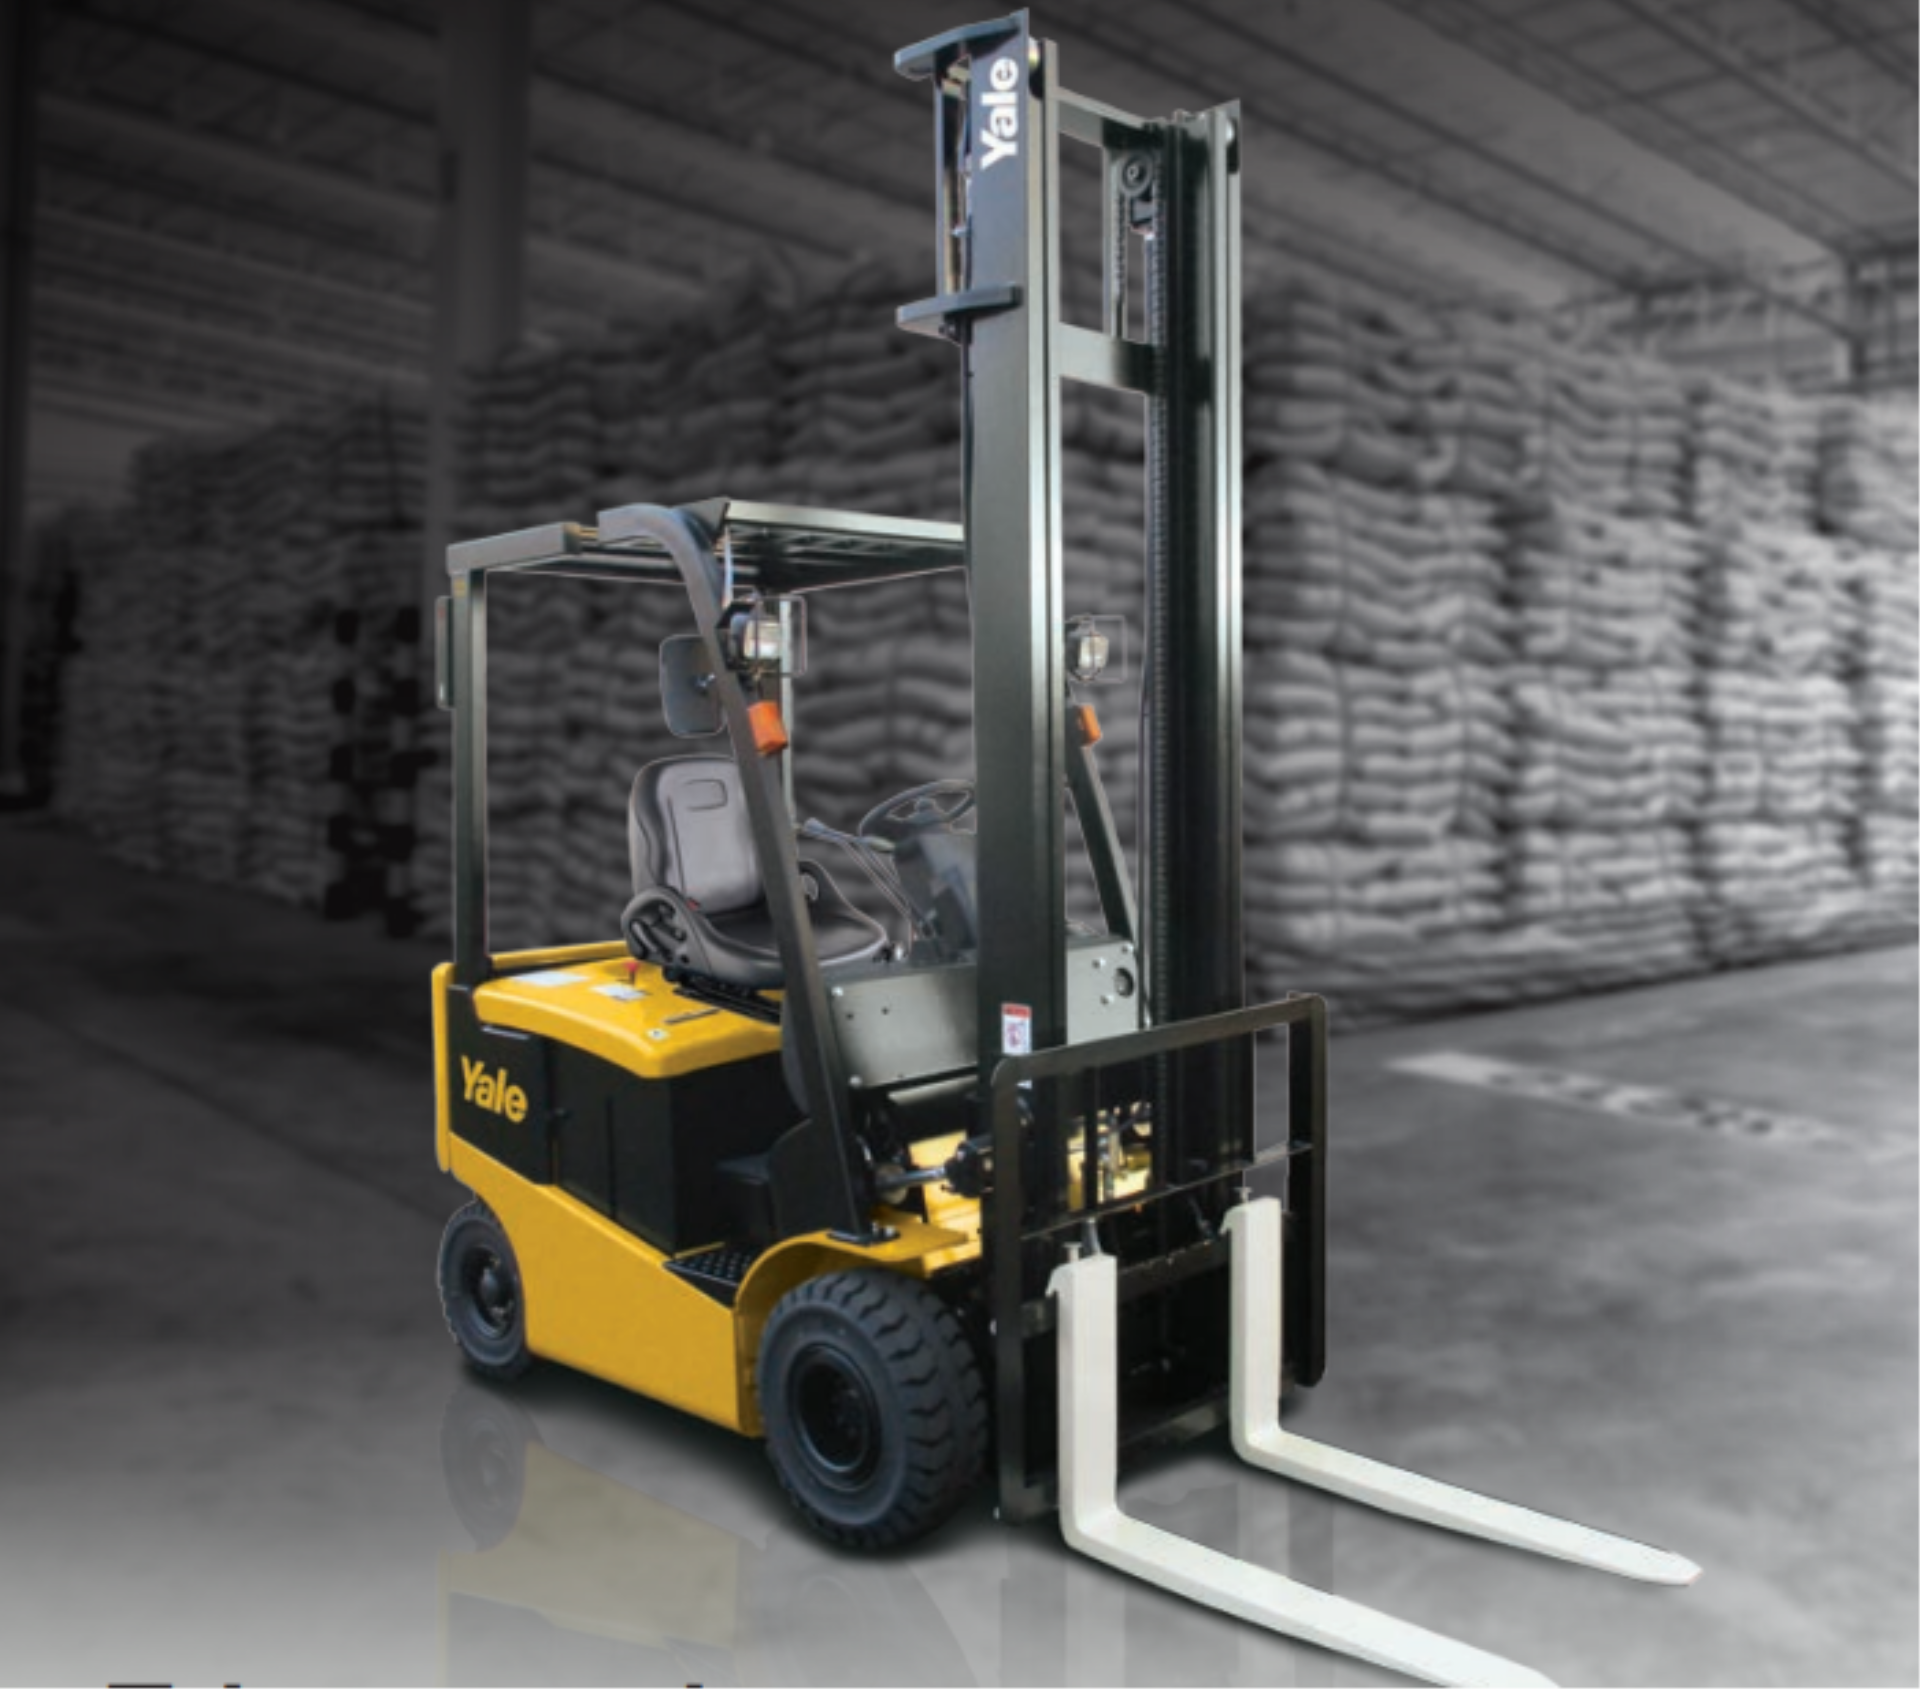 The FB15-35RZ electric forklift has a modern design